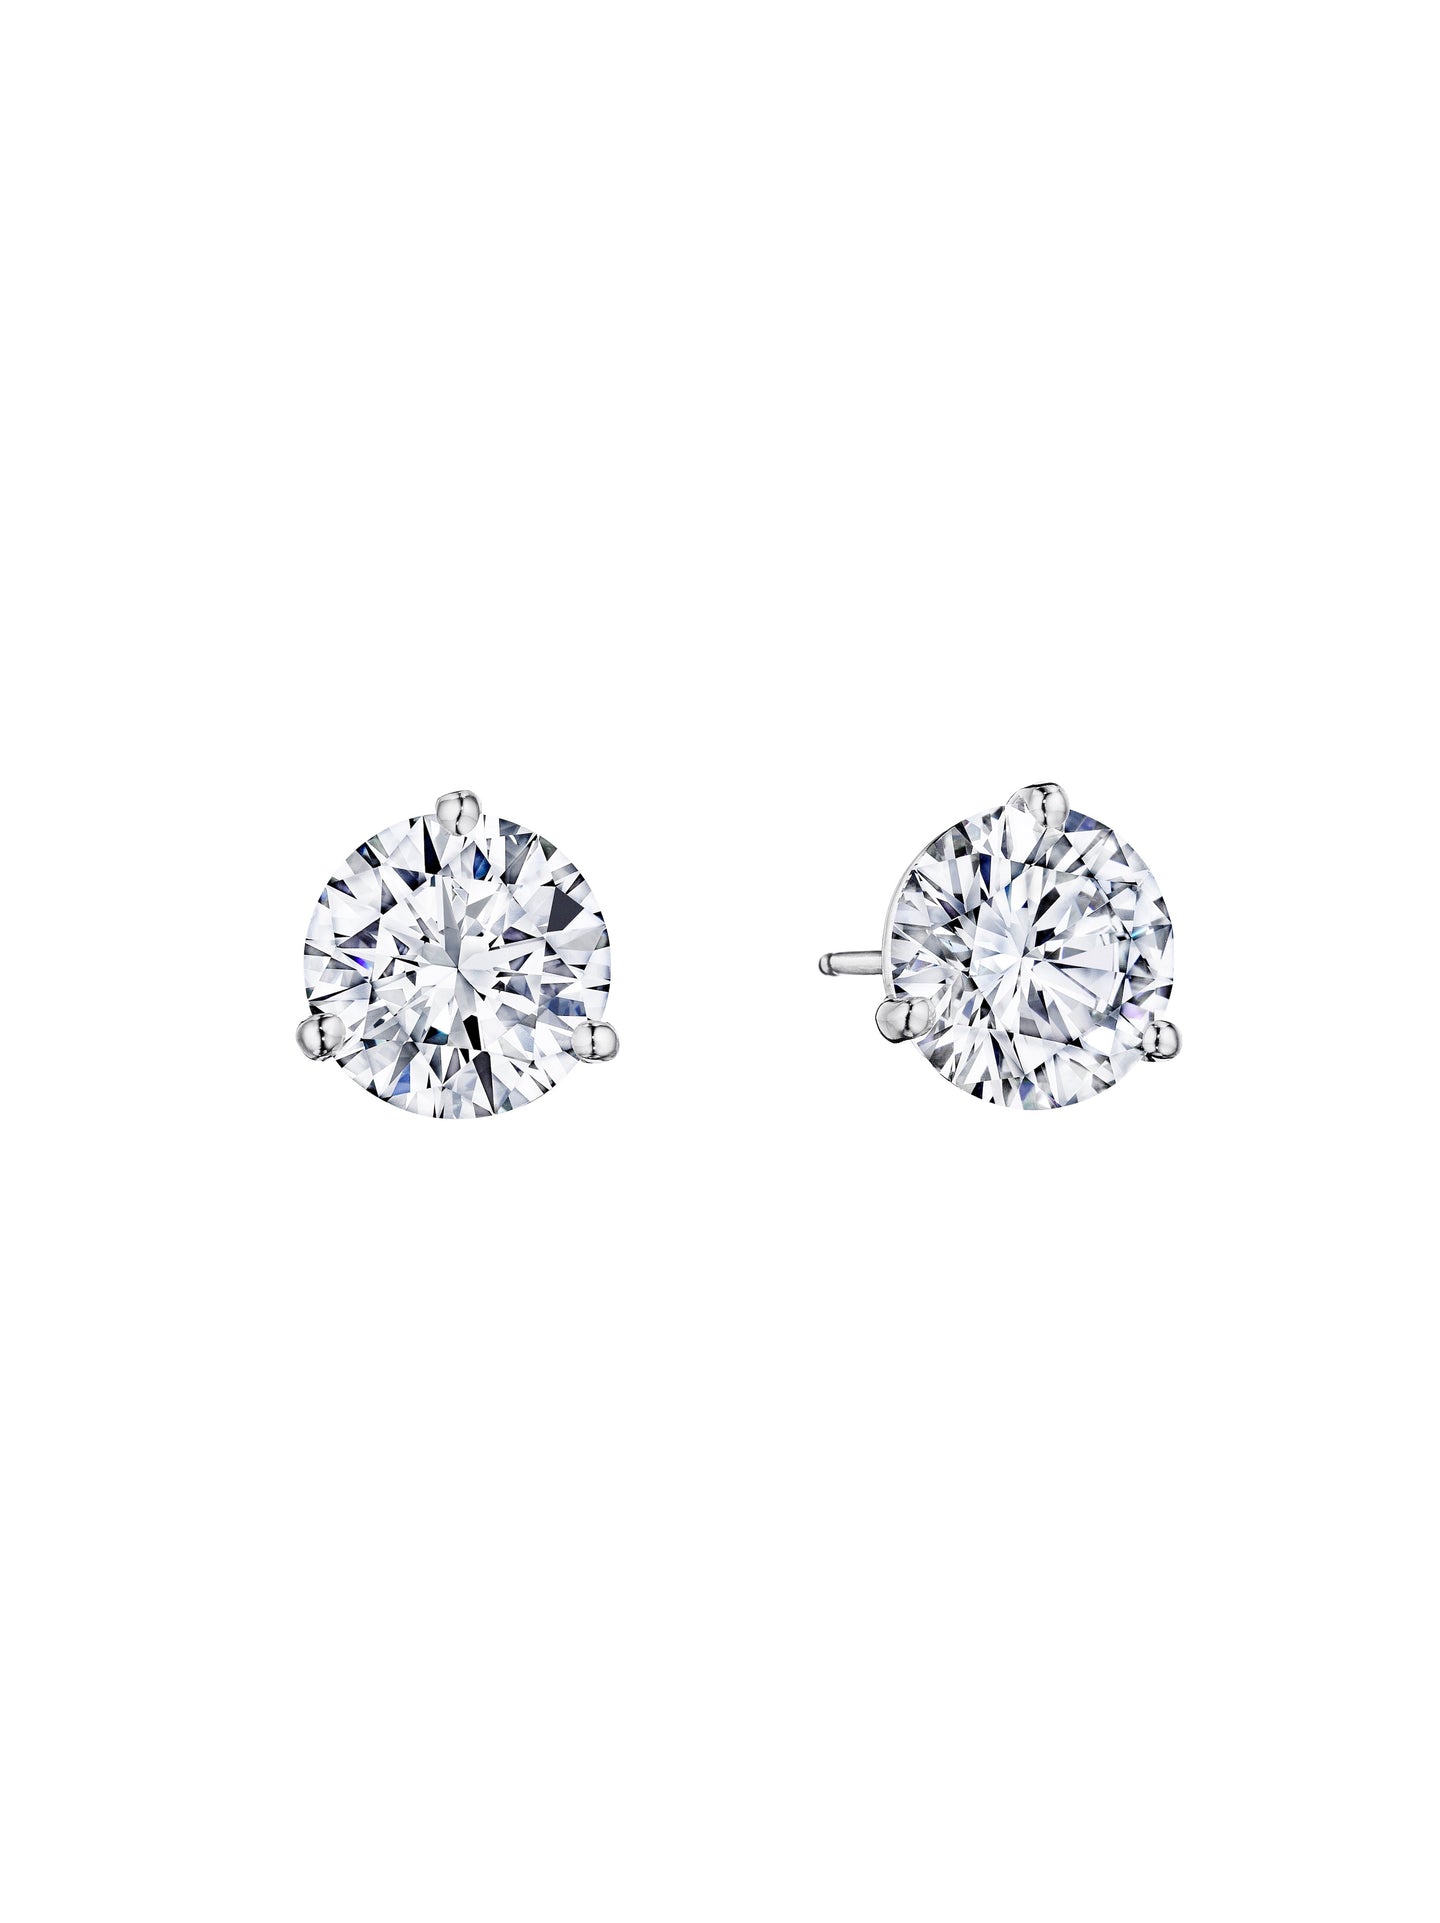 Sabel Collection Round Cut Large Diamond Studs in 3.05cttw Weight